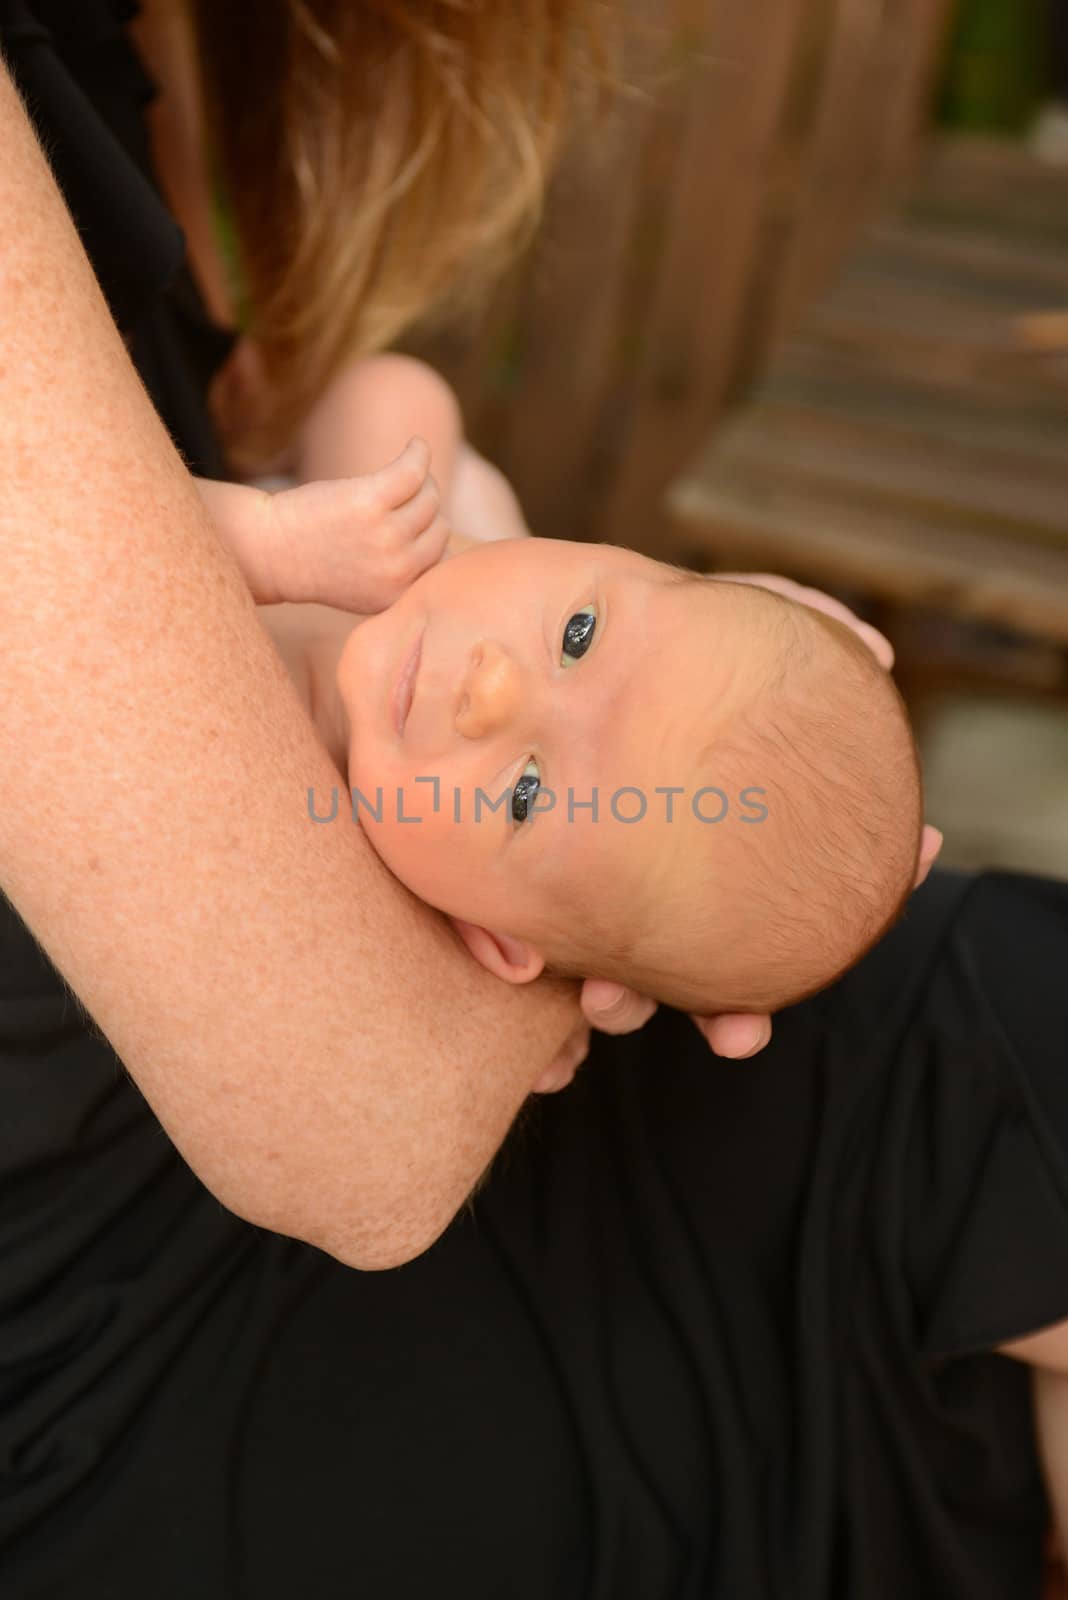 newborn baby being held by mother